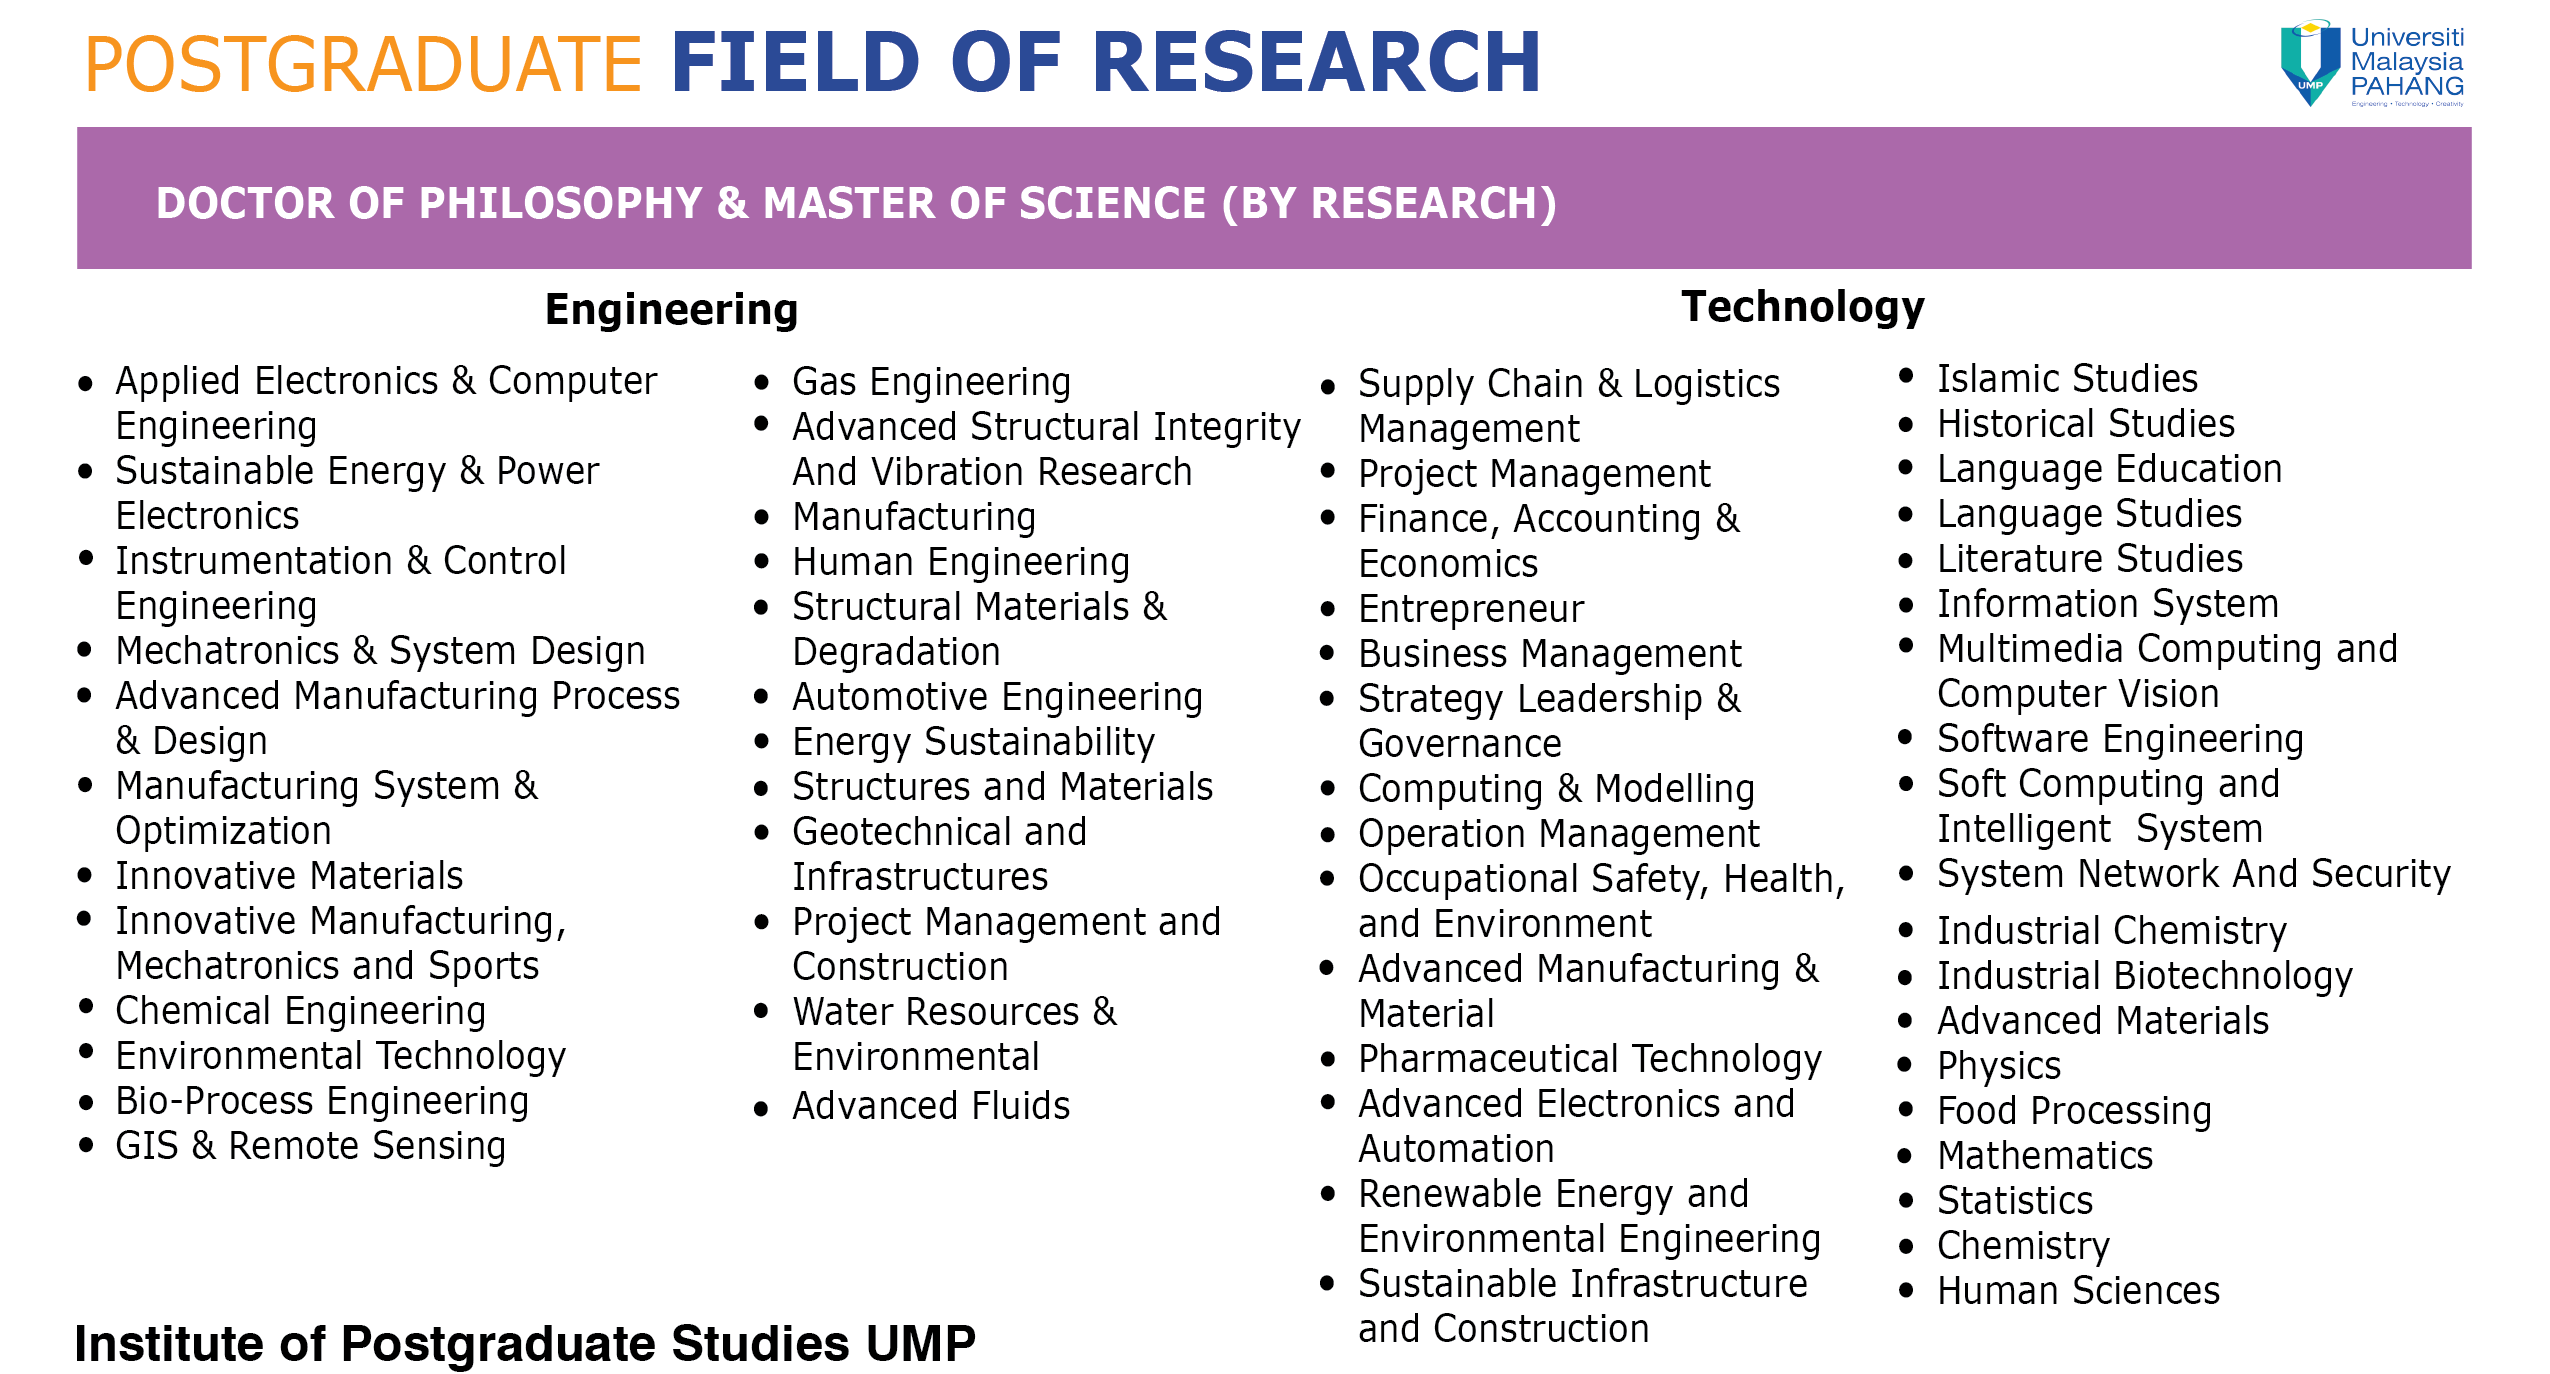 LIST FIELD OF RESEARCH 2018 01